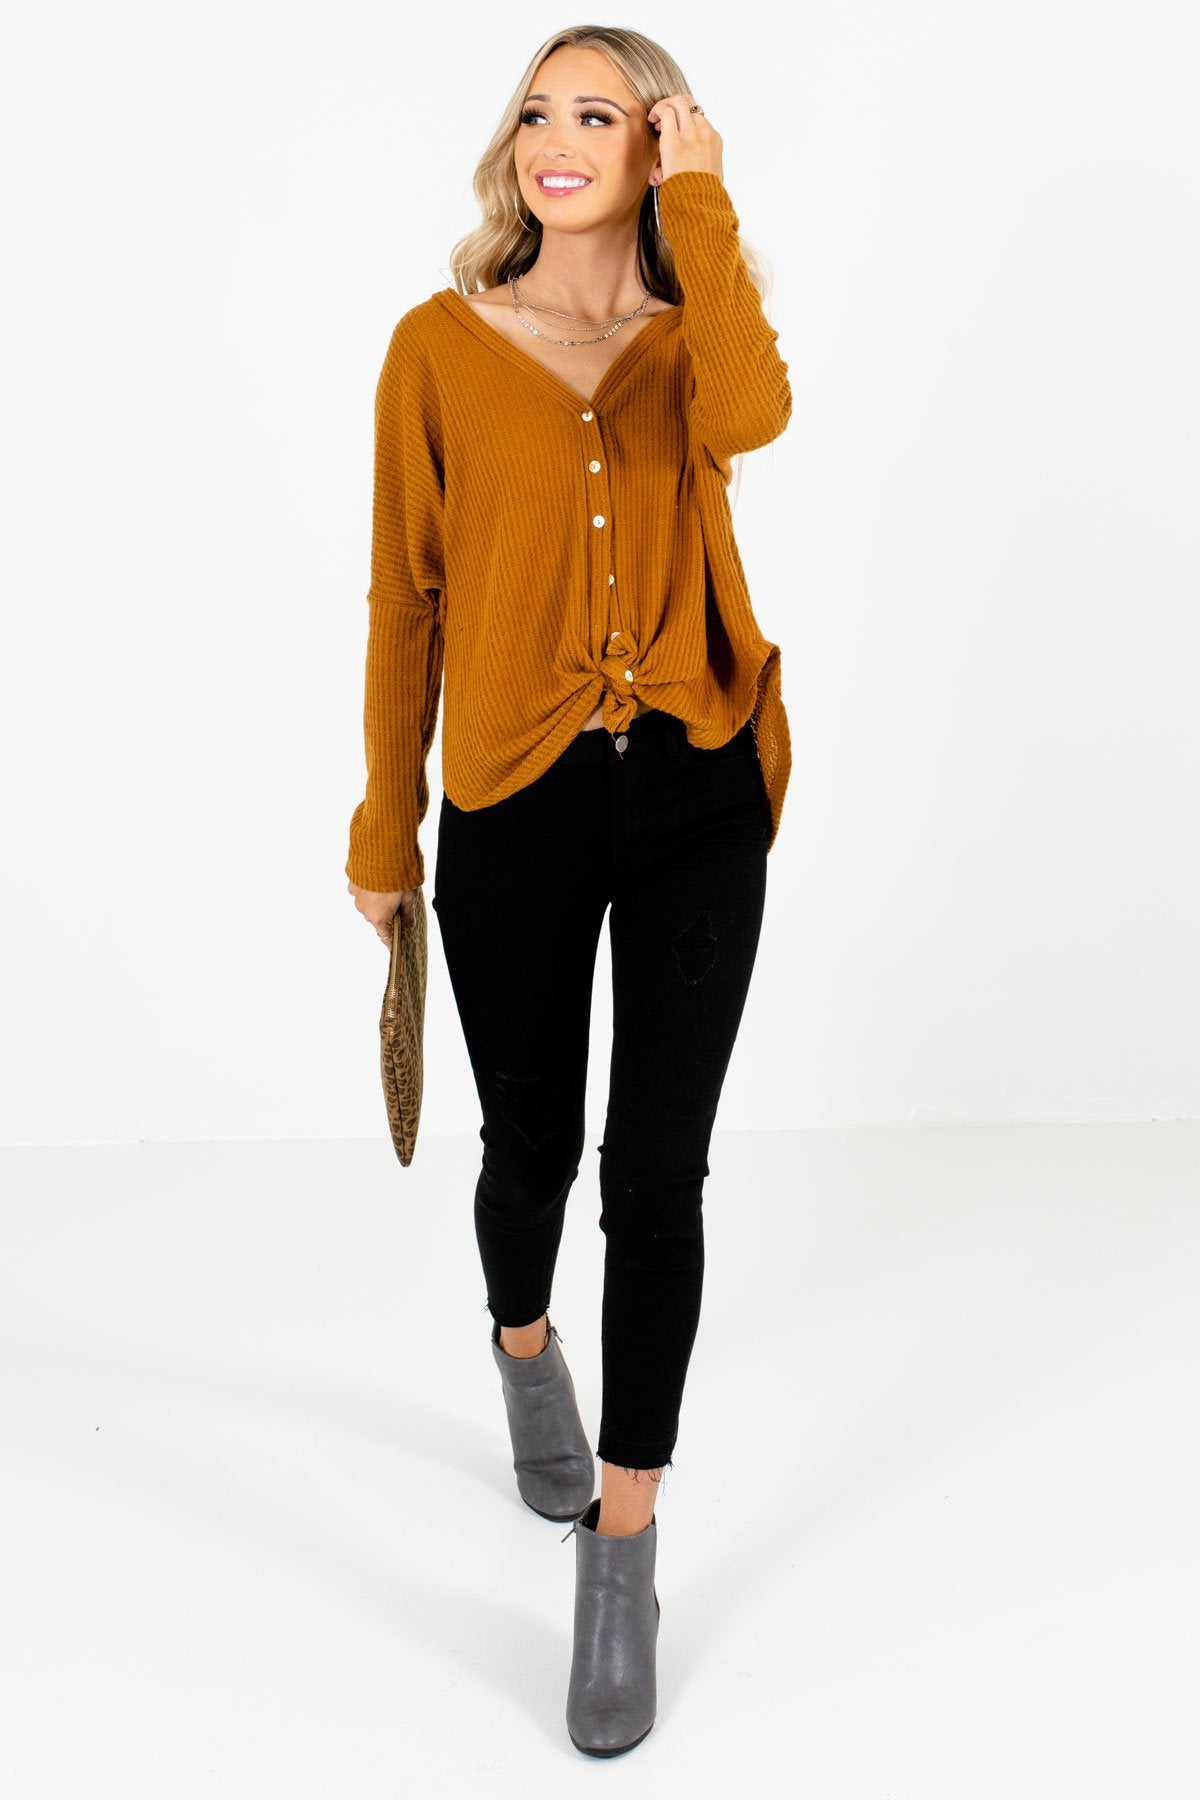 Tawny Orange Cute and Comfortable Boutique Tops for Women